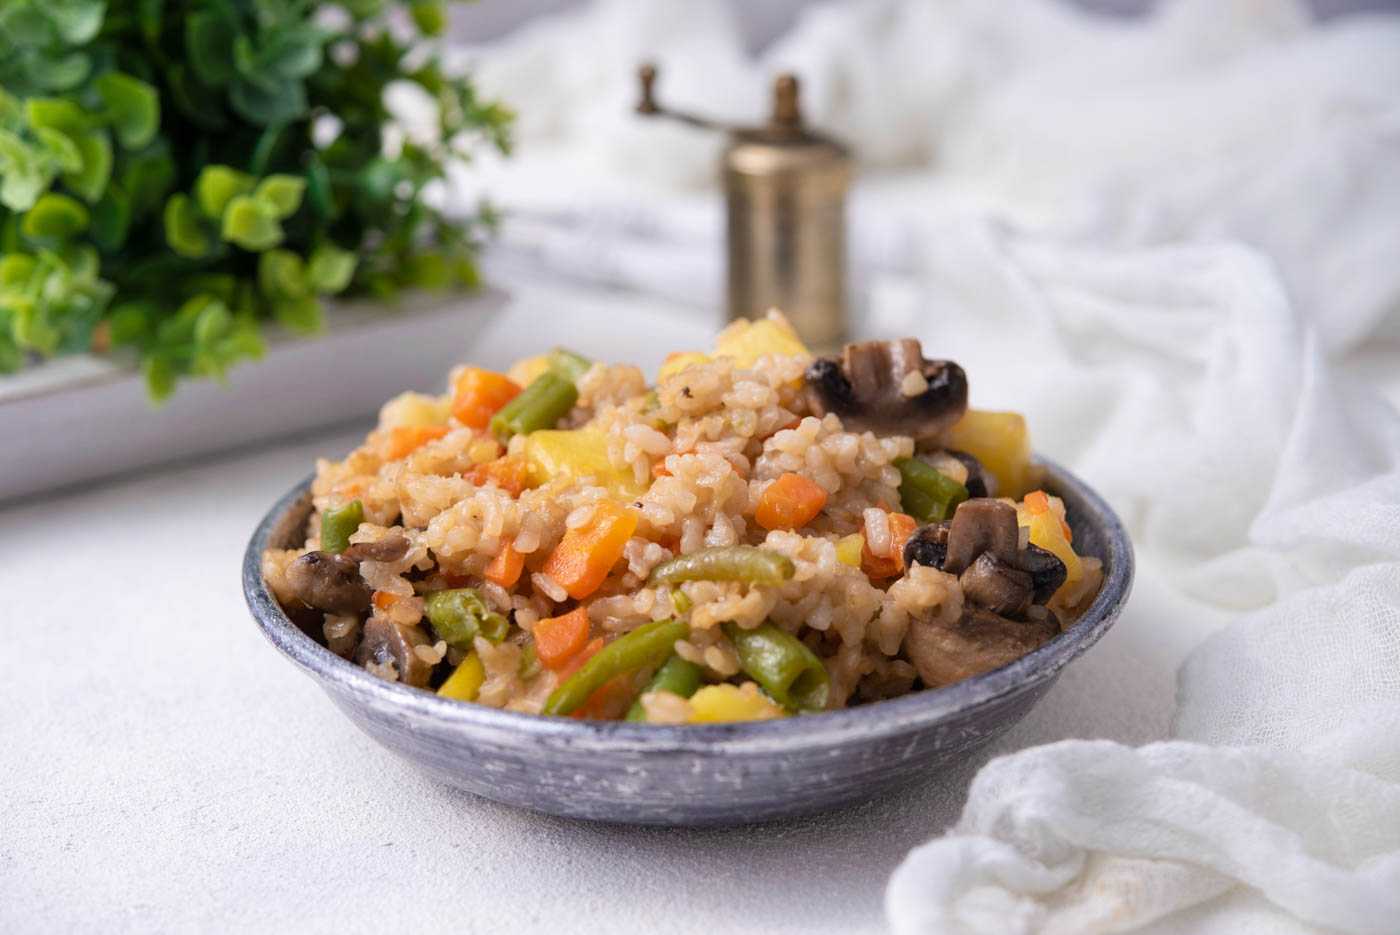 Instant Pot Rice Pilaf - Your Home, Made Healthy